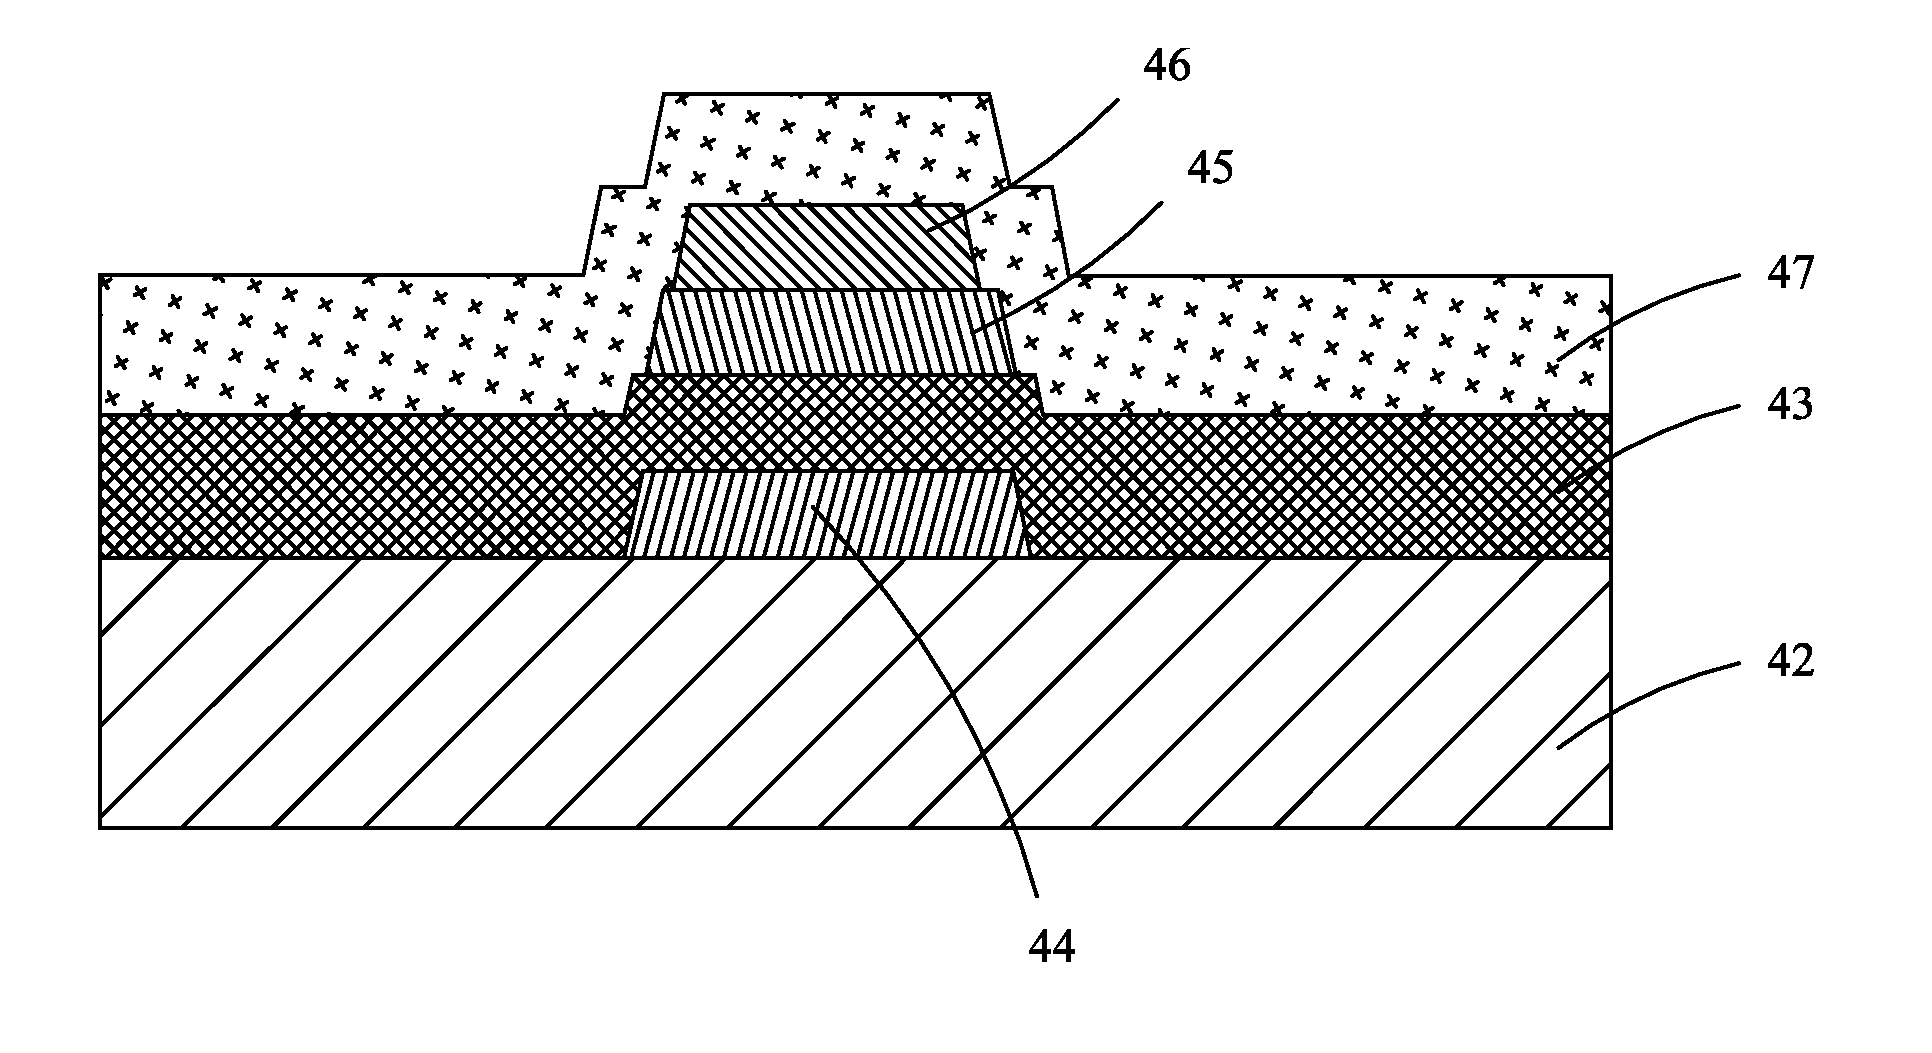 Antistatic structure of array substrate